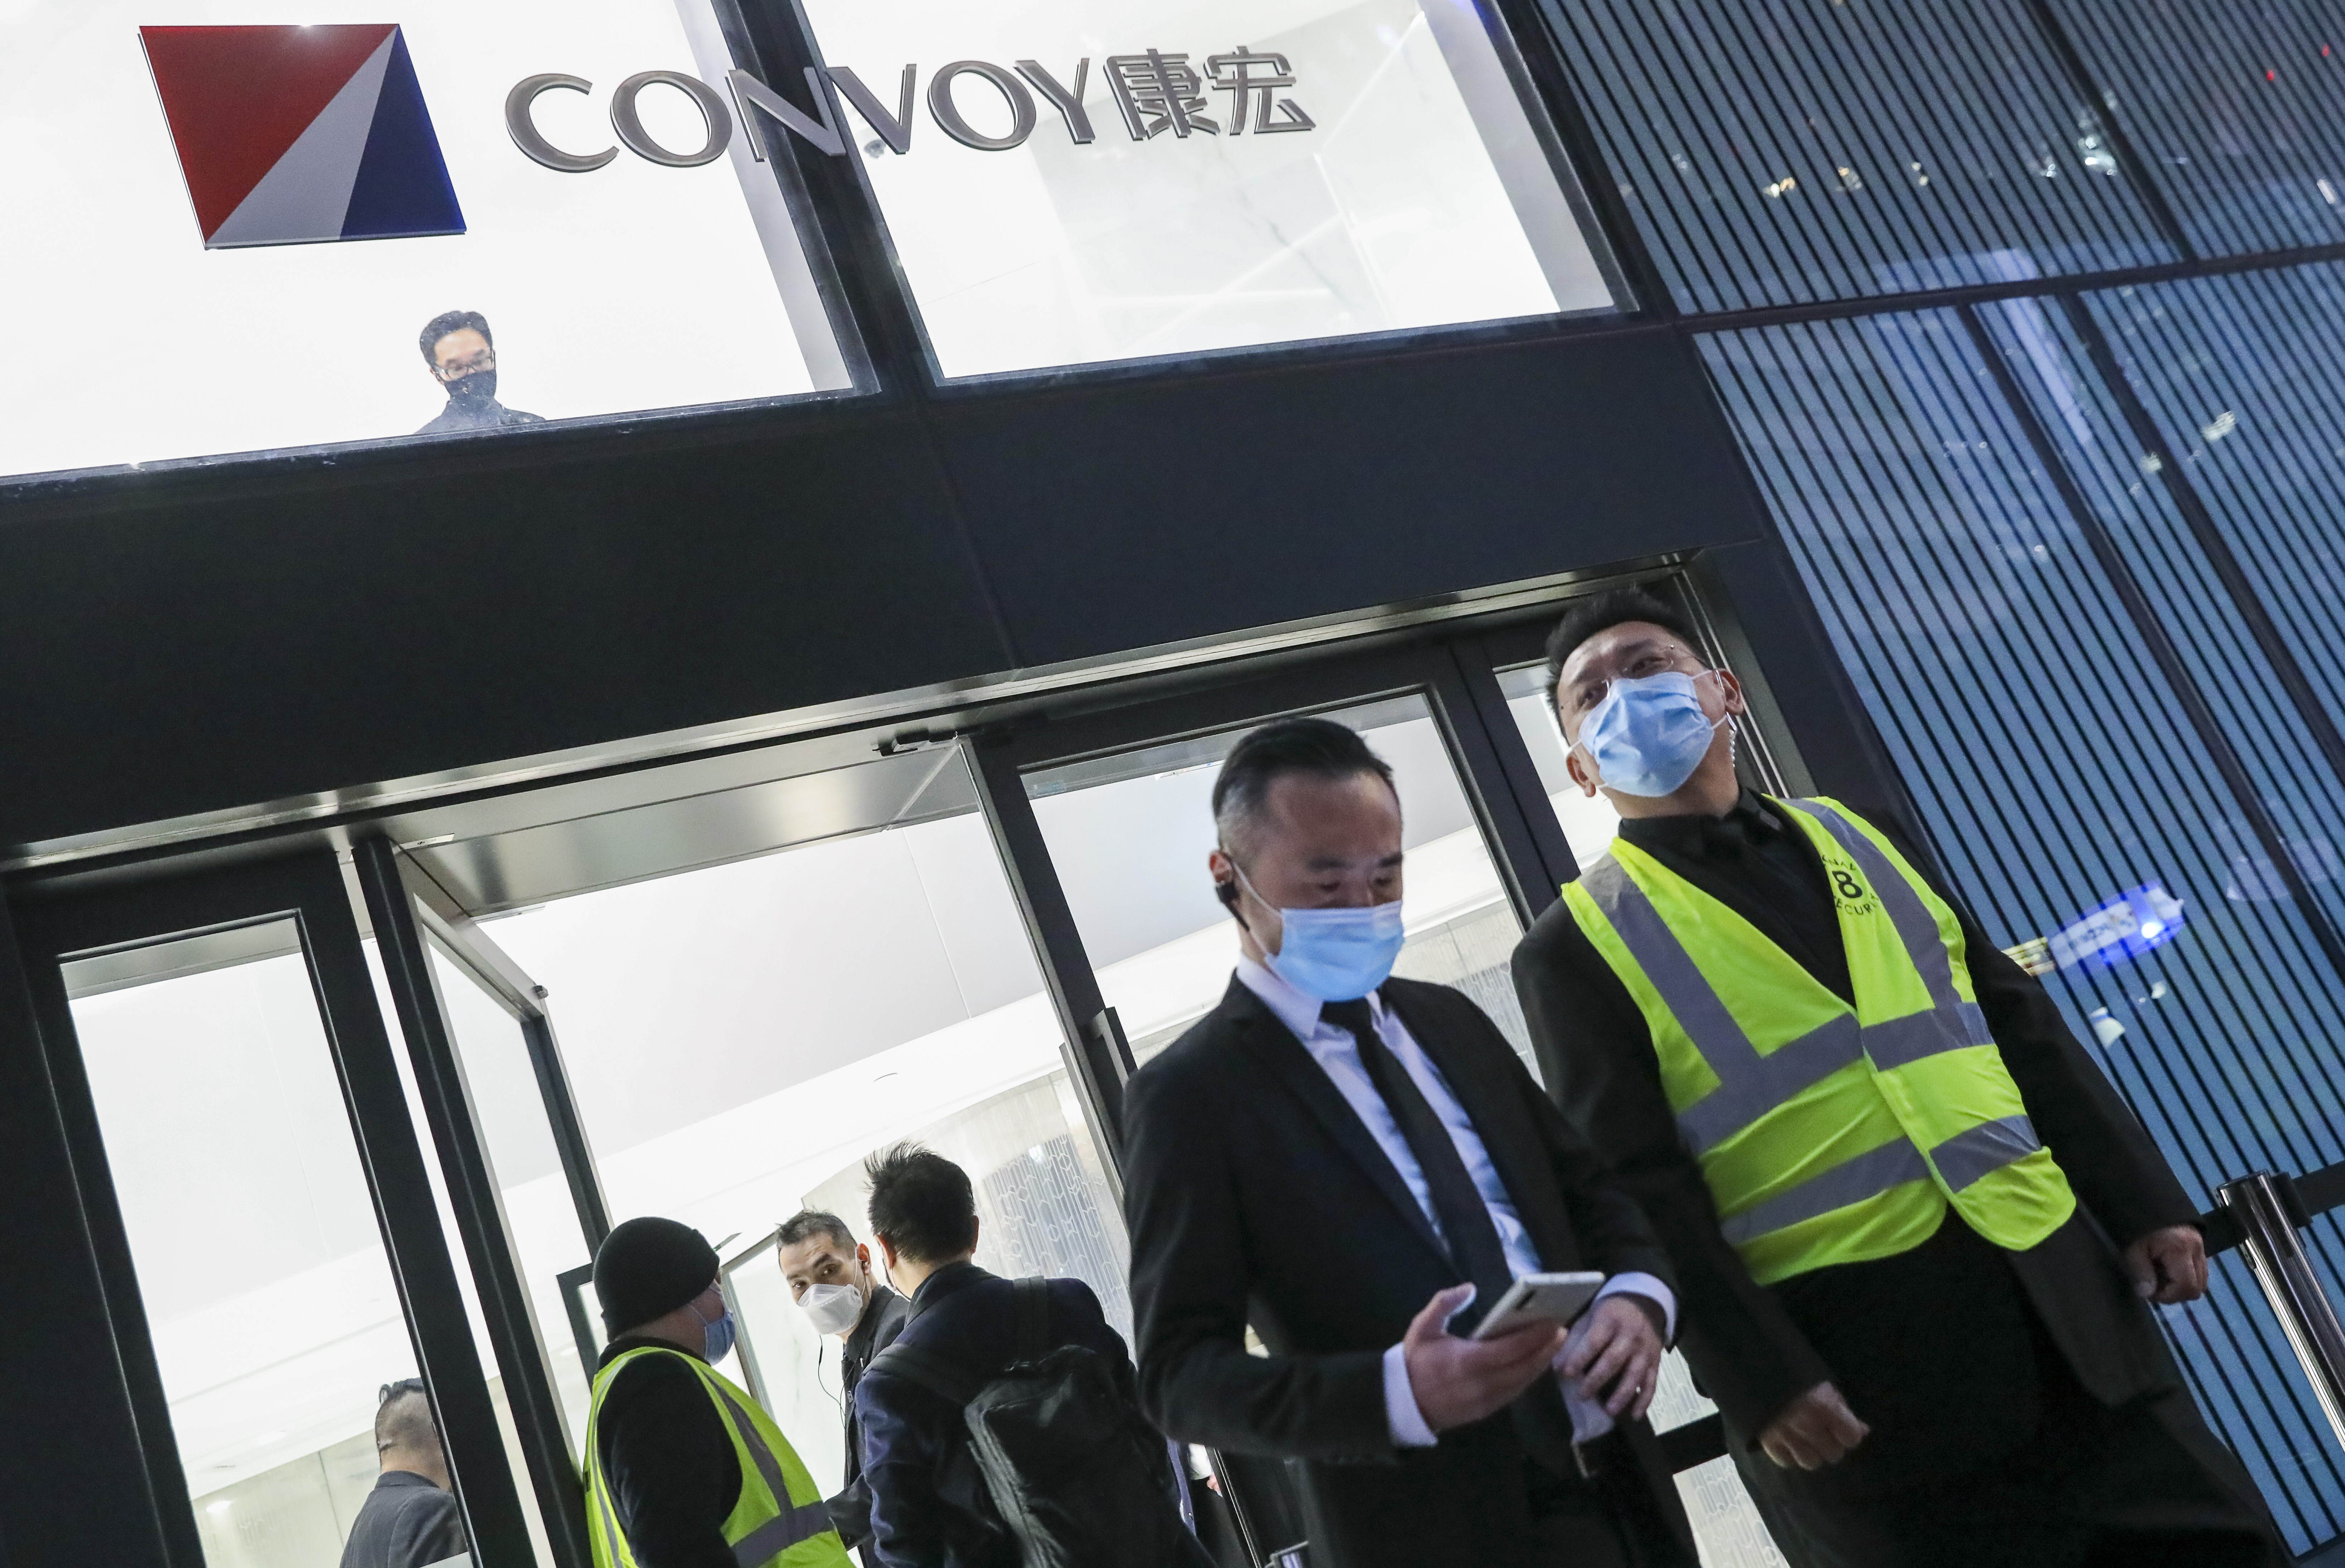 The office of Convoy Global Holdings in Wan Chai ahead of an extraordinary general meeting of shareholders on January 7, 2021. Photo: K. Y. Cheng